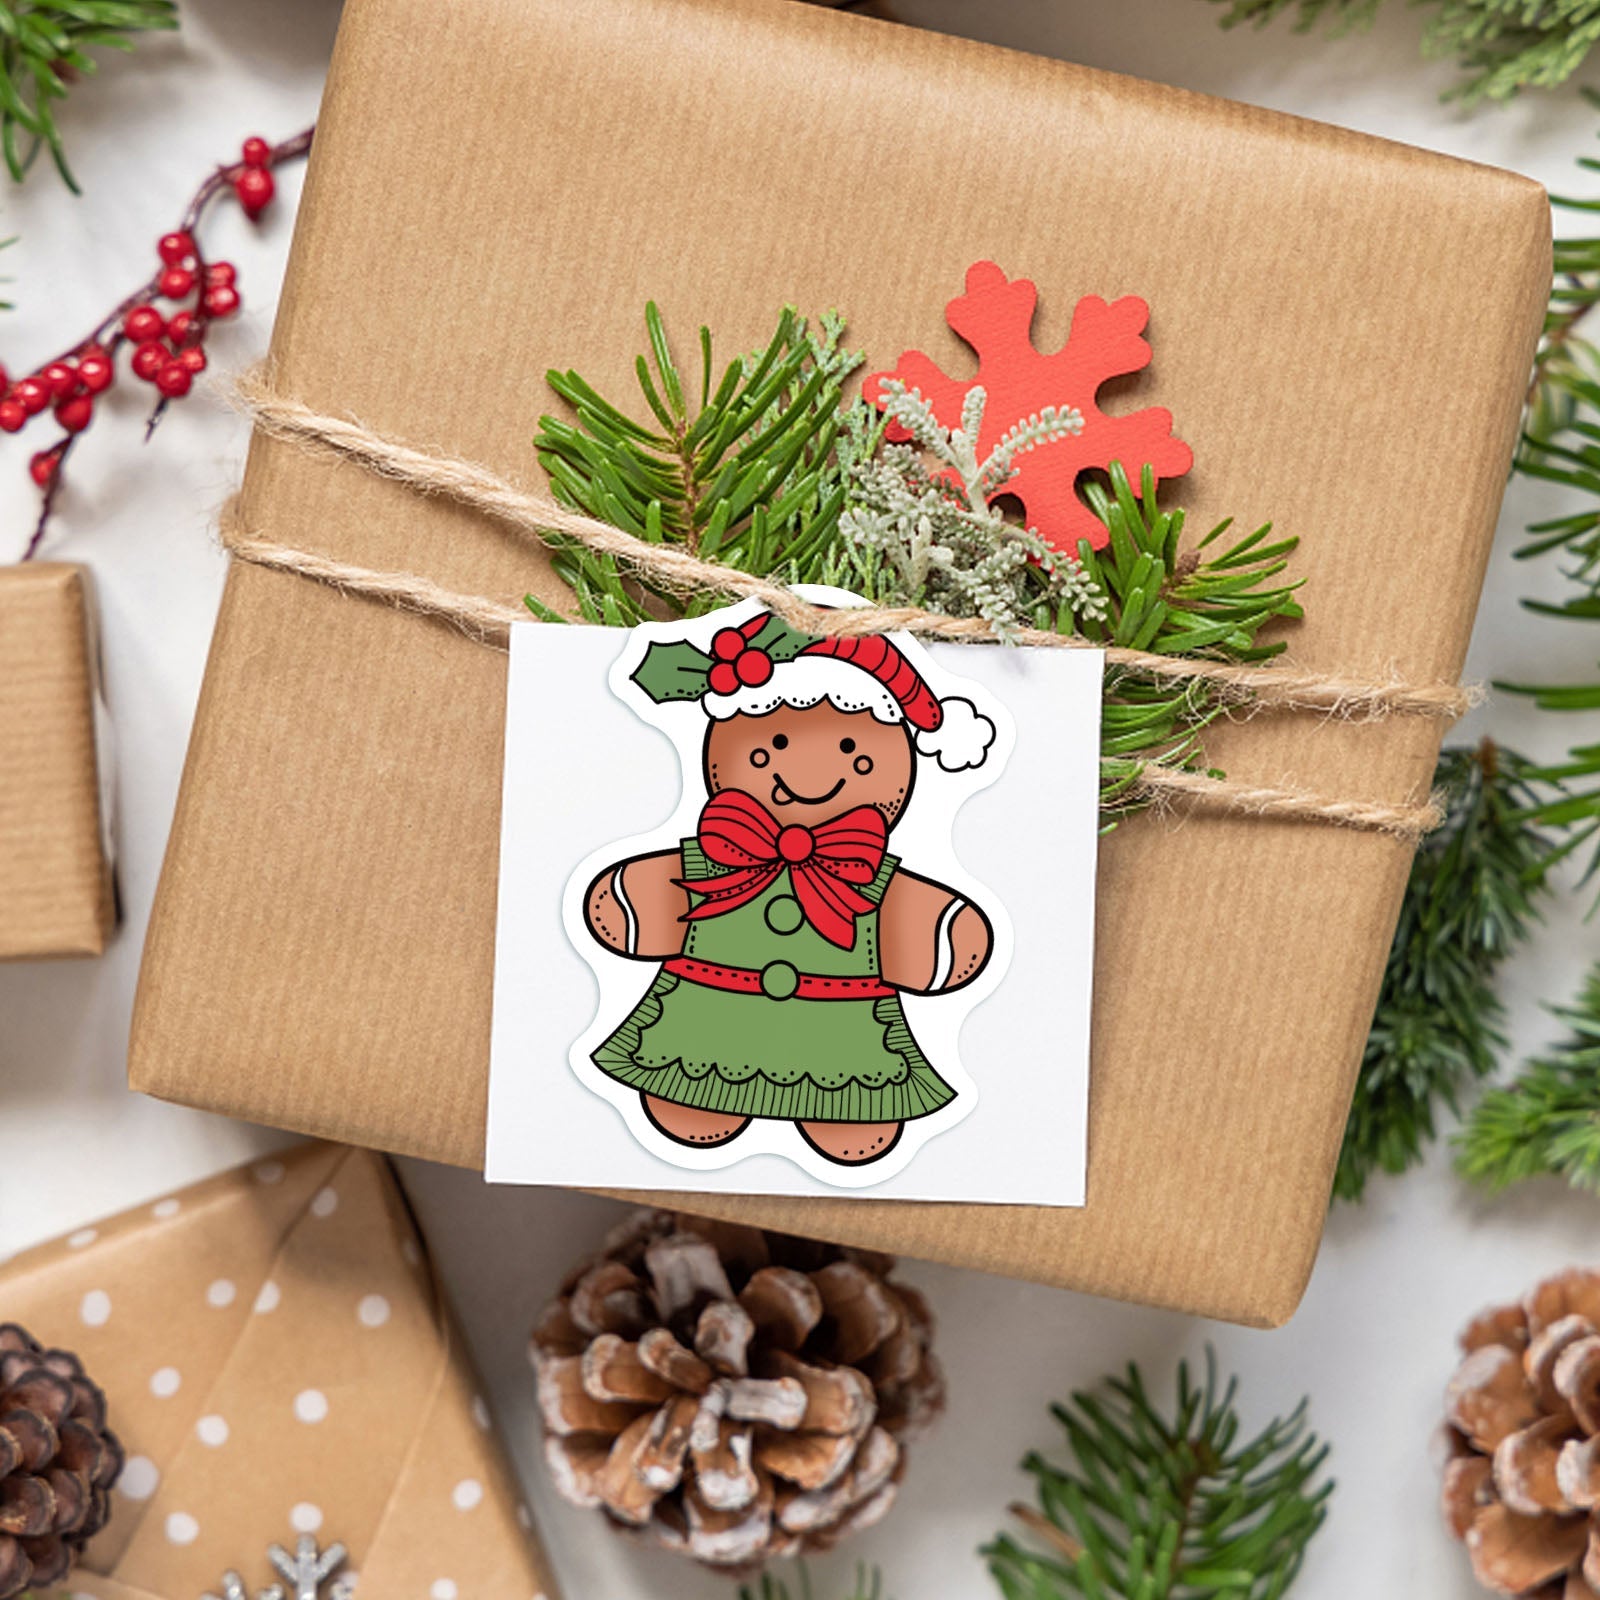 Christmas Background With Gingerbread Man Holding A Happy Holidays Sign And  Christmas Gifts In Teal Setting Stock Photo - Download Image Now - iStock